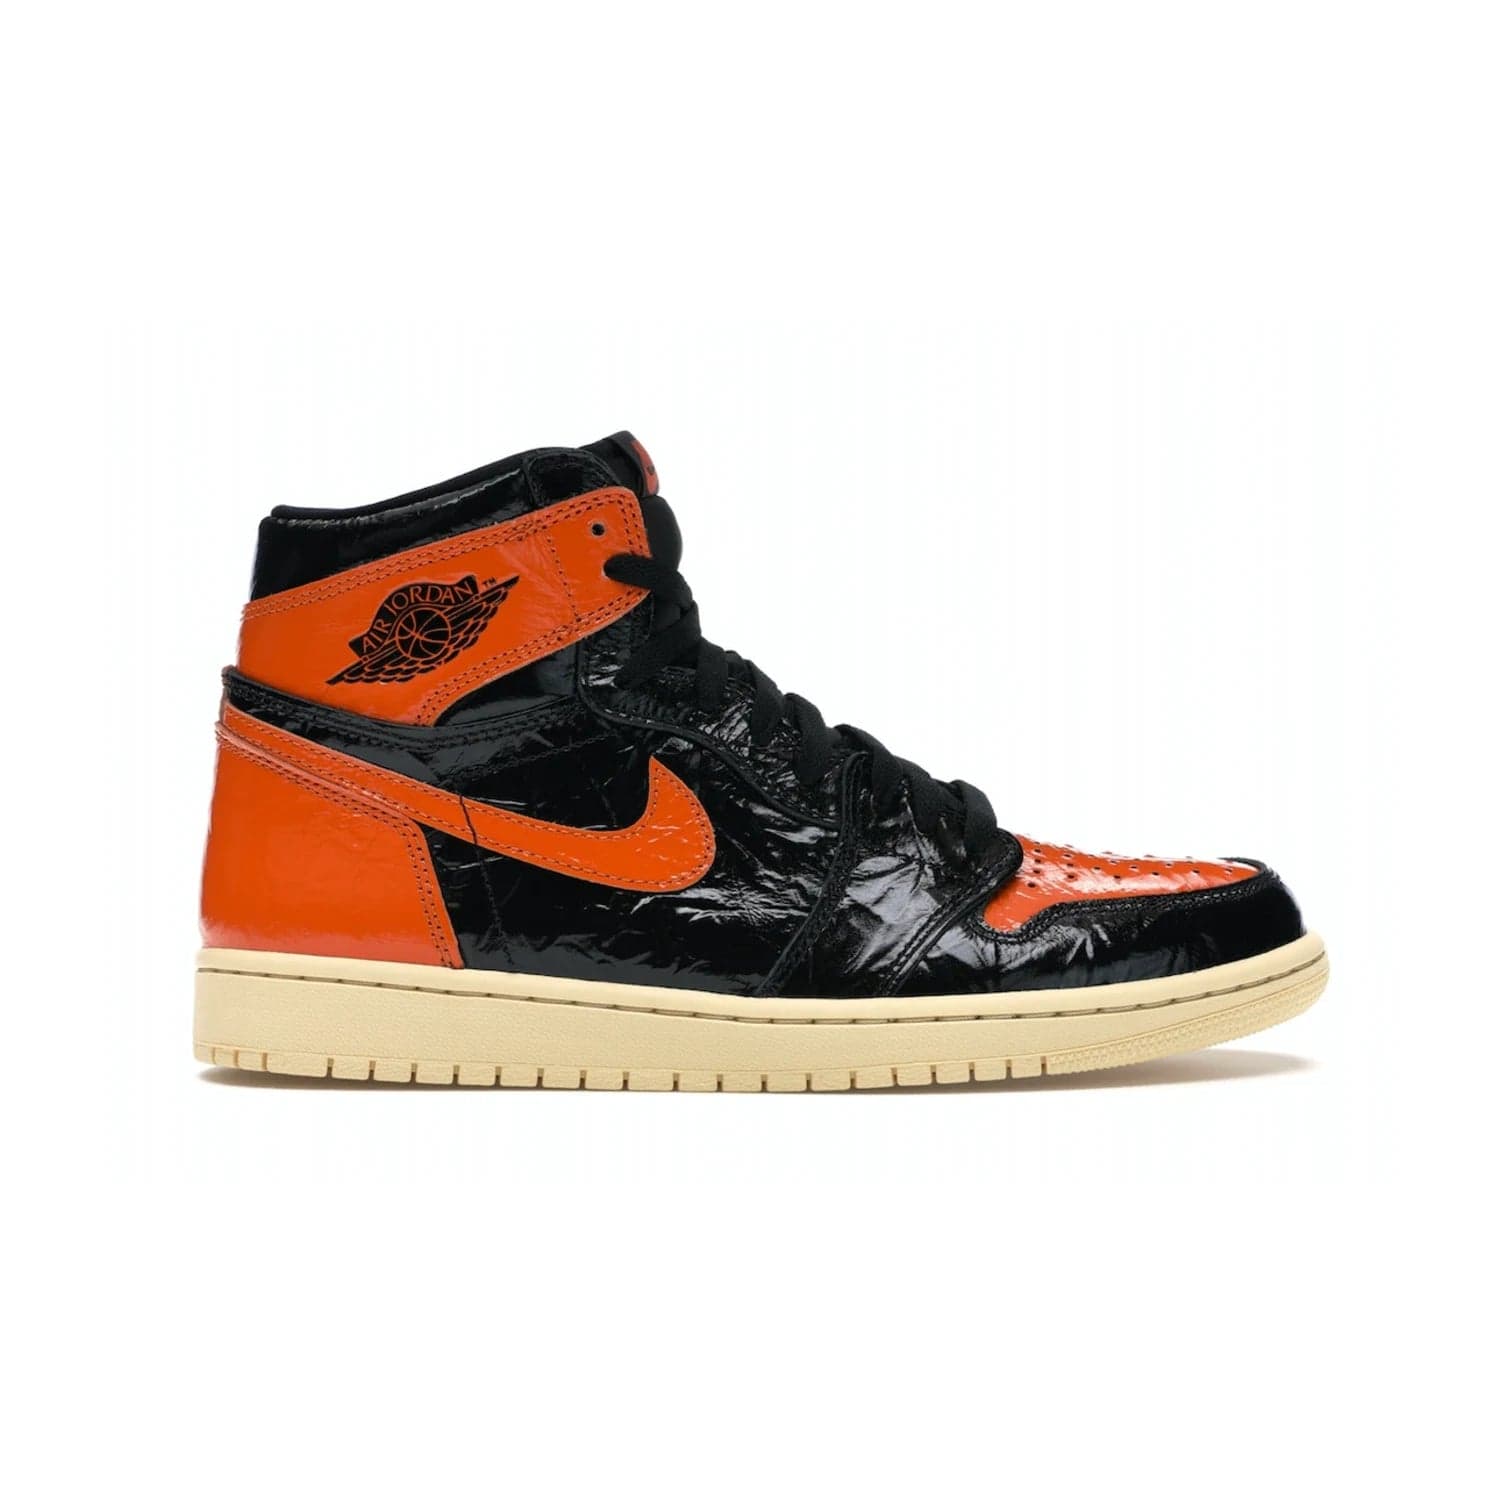 Jordan 1 Retro High Shattered Backboard 3.0 - Image 1 - Only at www.BallersClubKickz.com - #
Jordan 1 Retro High Shattered Backboard 3.0: the perfect blend of modern style and nostalgic flair featuring an orange and black crinkled patent leather upper and yellowed vanilla outsole. Get these exclusive sneakers released in October of 2019!